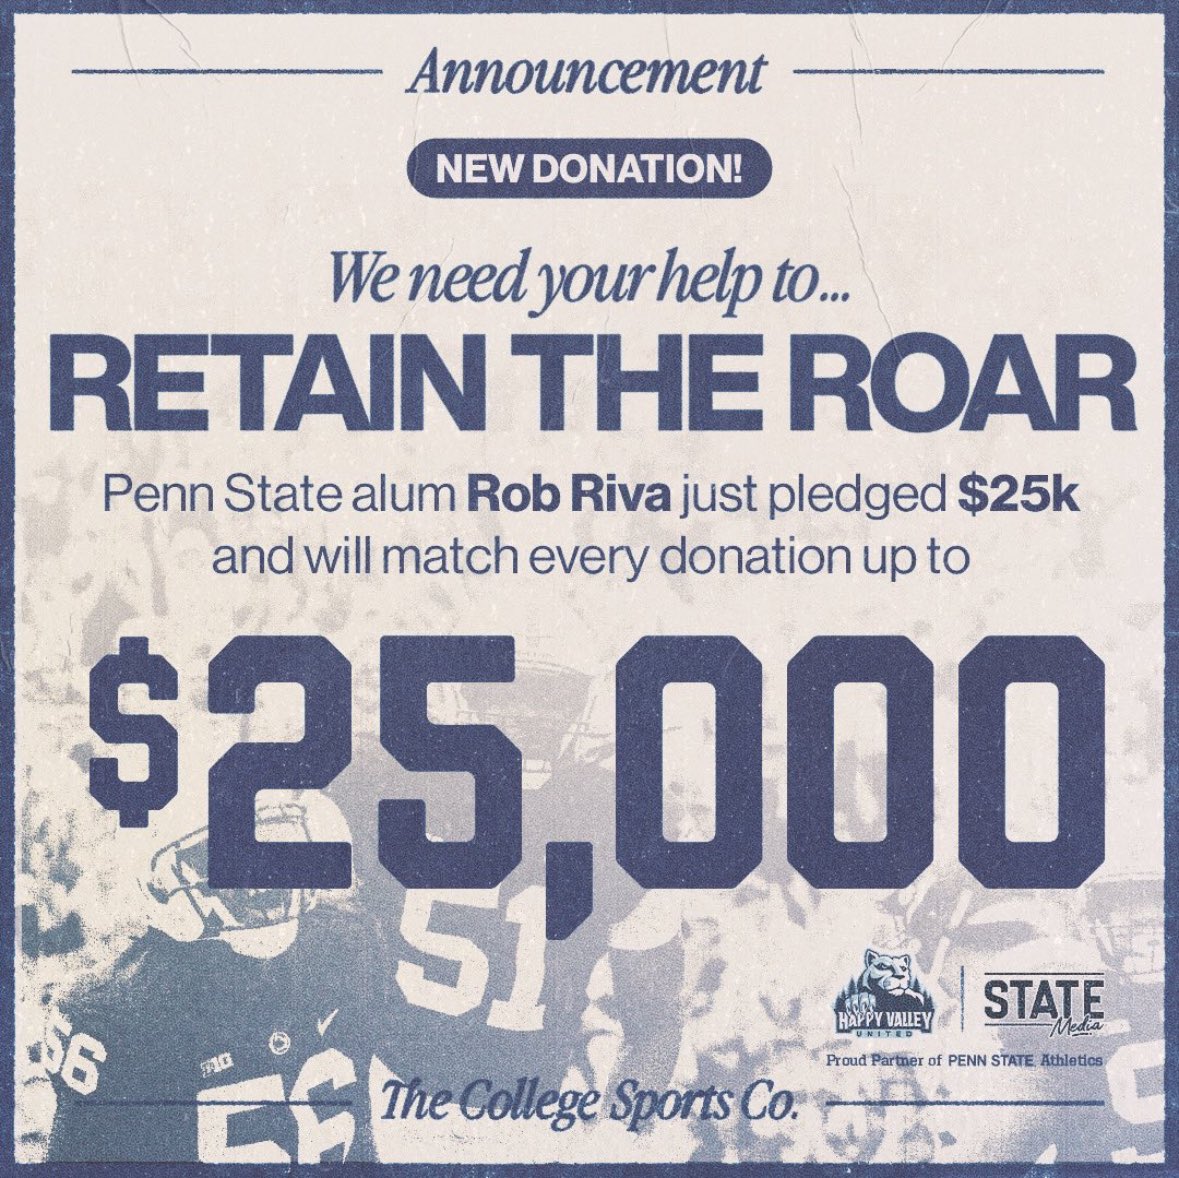 Nittany Nation, BIG NEWS! 🎉 Penn State alum Rob Riva donated $25,000 AND is matching any new donations up to $25,000! Donate today and help @pennstatefball compete for championships 👇 givebutter.com/retaintheroar